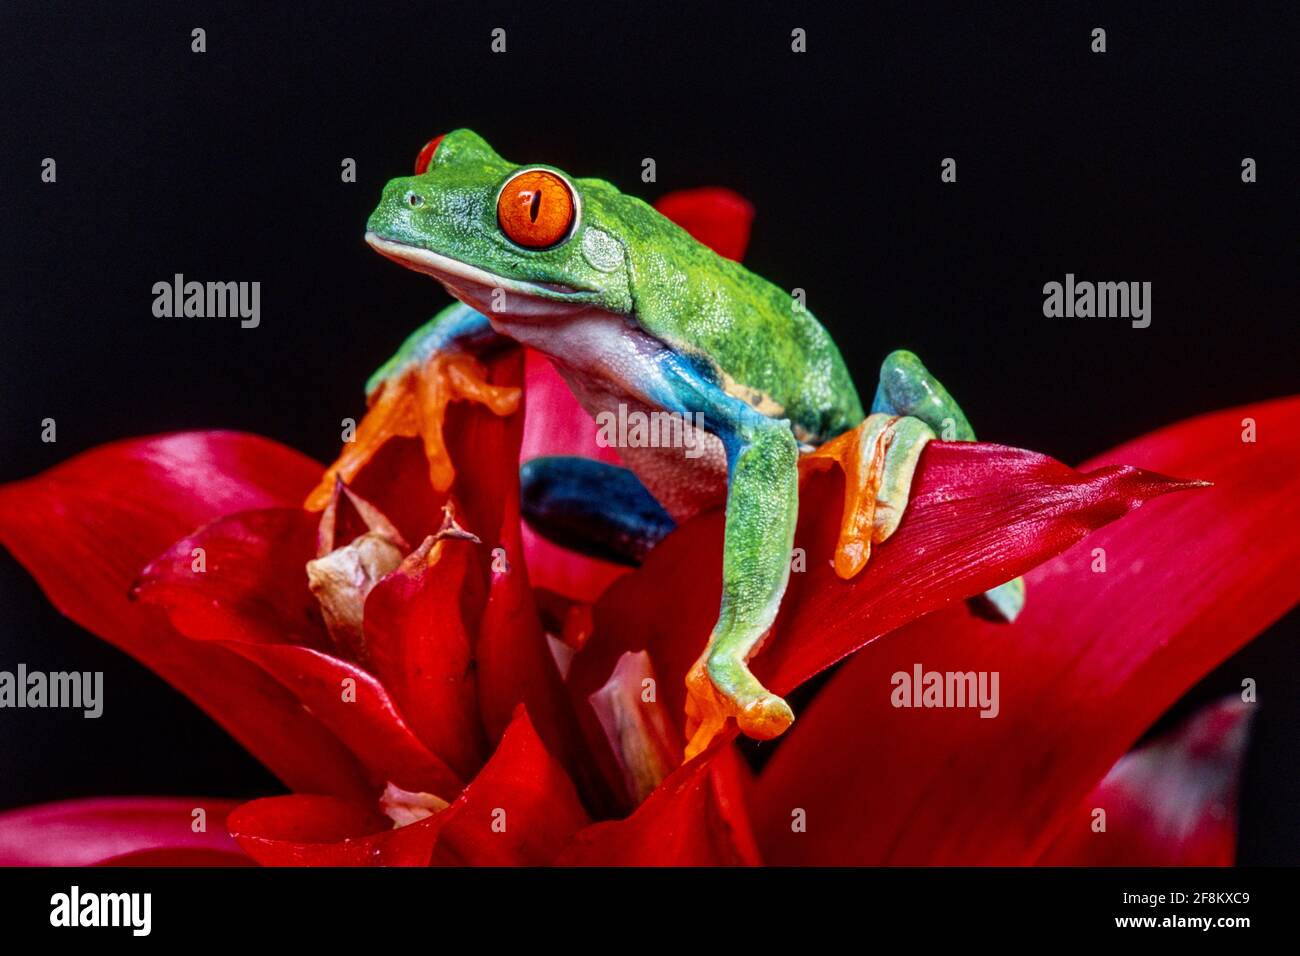 A Red-eyed Leaf Frog, Agalychnis callidryas, on a red bromeliad inflorescence.  These frogs are primarily nocturnal, sleeping during the day. Stock Photo